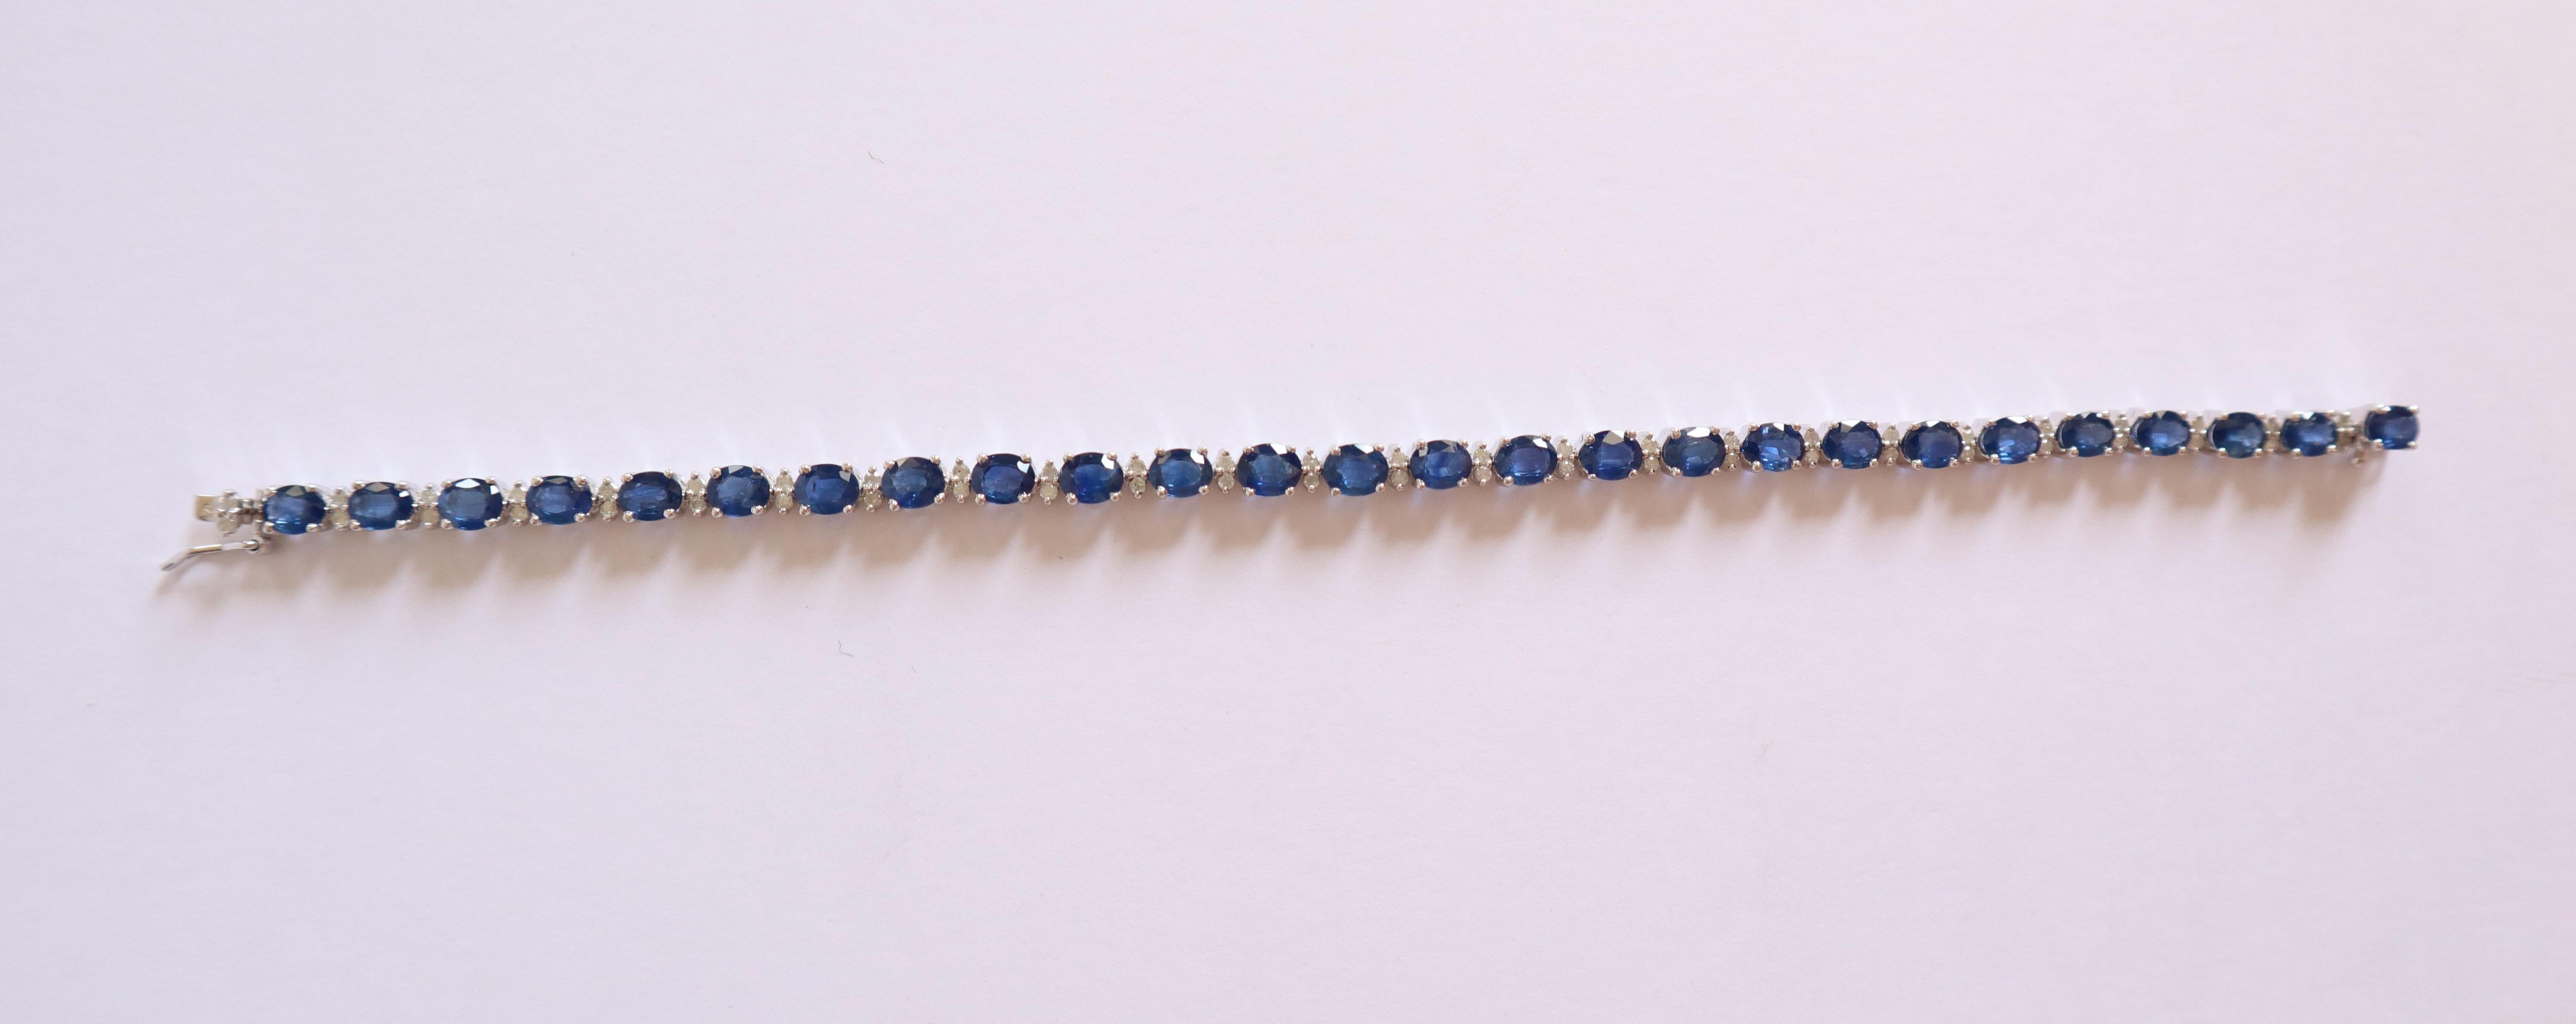 Bracelet in 18K white gold, sapphires and diamonds composed of 26 prong-set sapphires (4x5 mm) for a total weight of 10.3 carats alternated with 26 motifs composed of 2 diamonds, that is 52 diamonds for a total weight of 0.5 carat.
Length: 18 cm